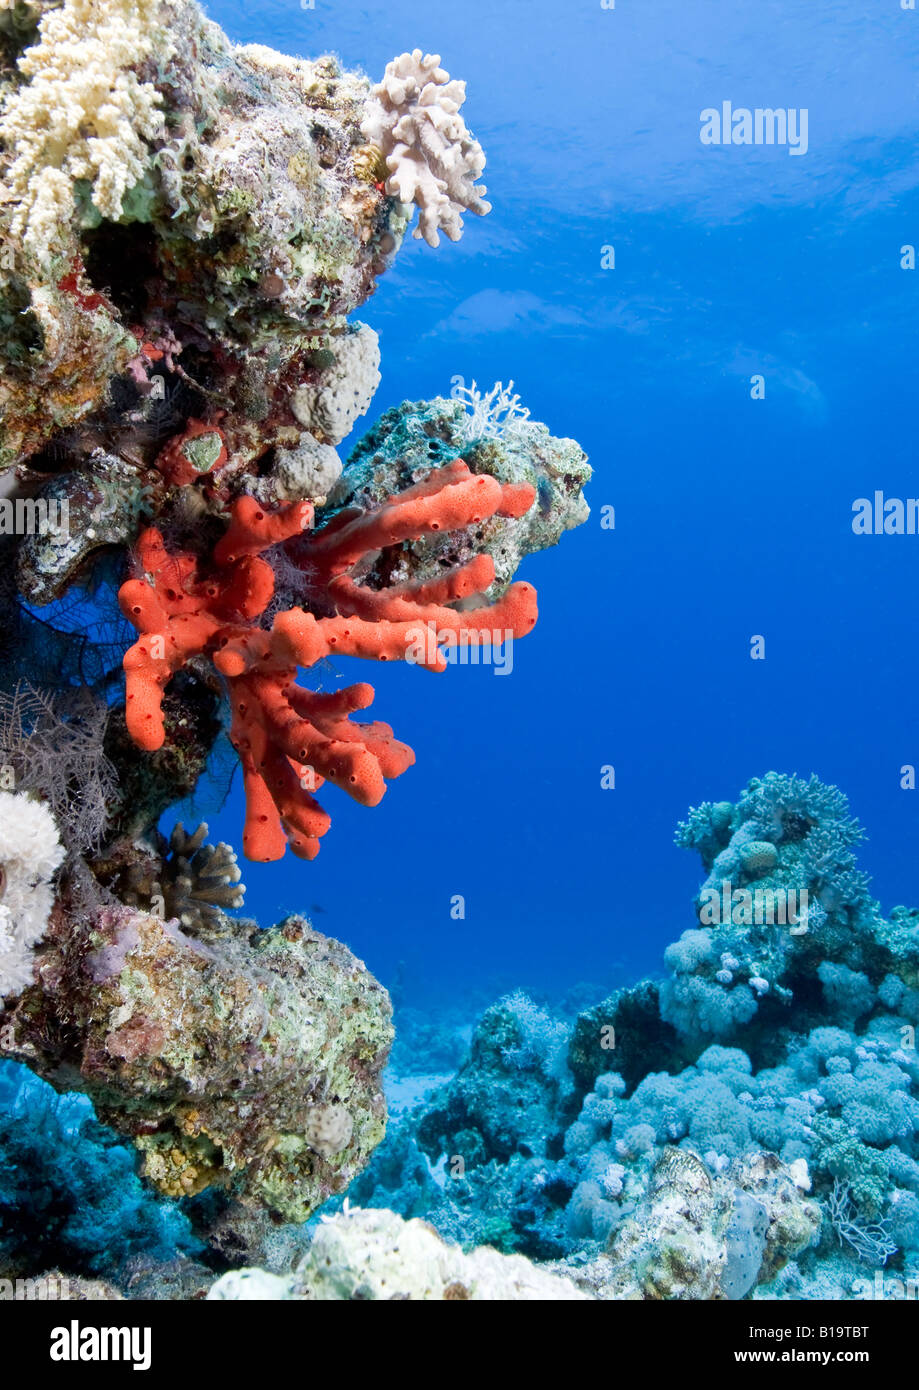 This Fire Sponge adorns the coral reef near Hurghada in the Egyptian Red Sea. Stock Photo